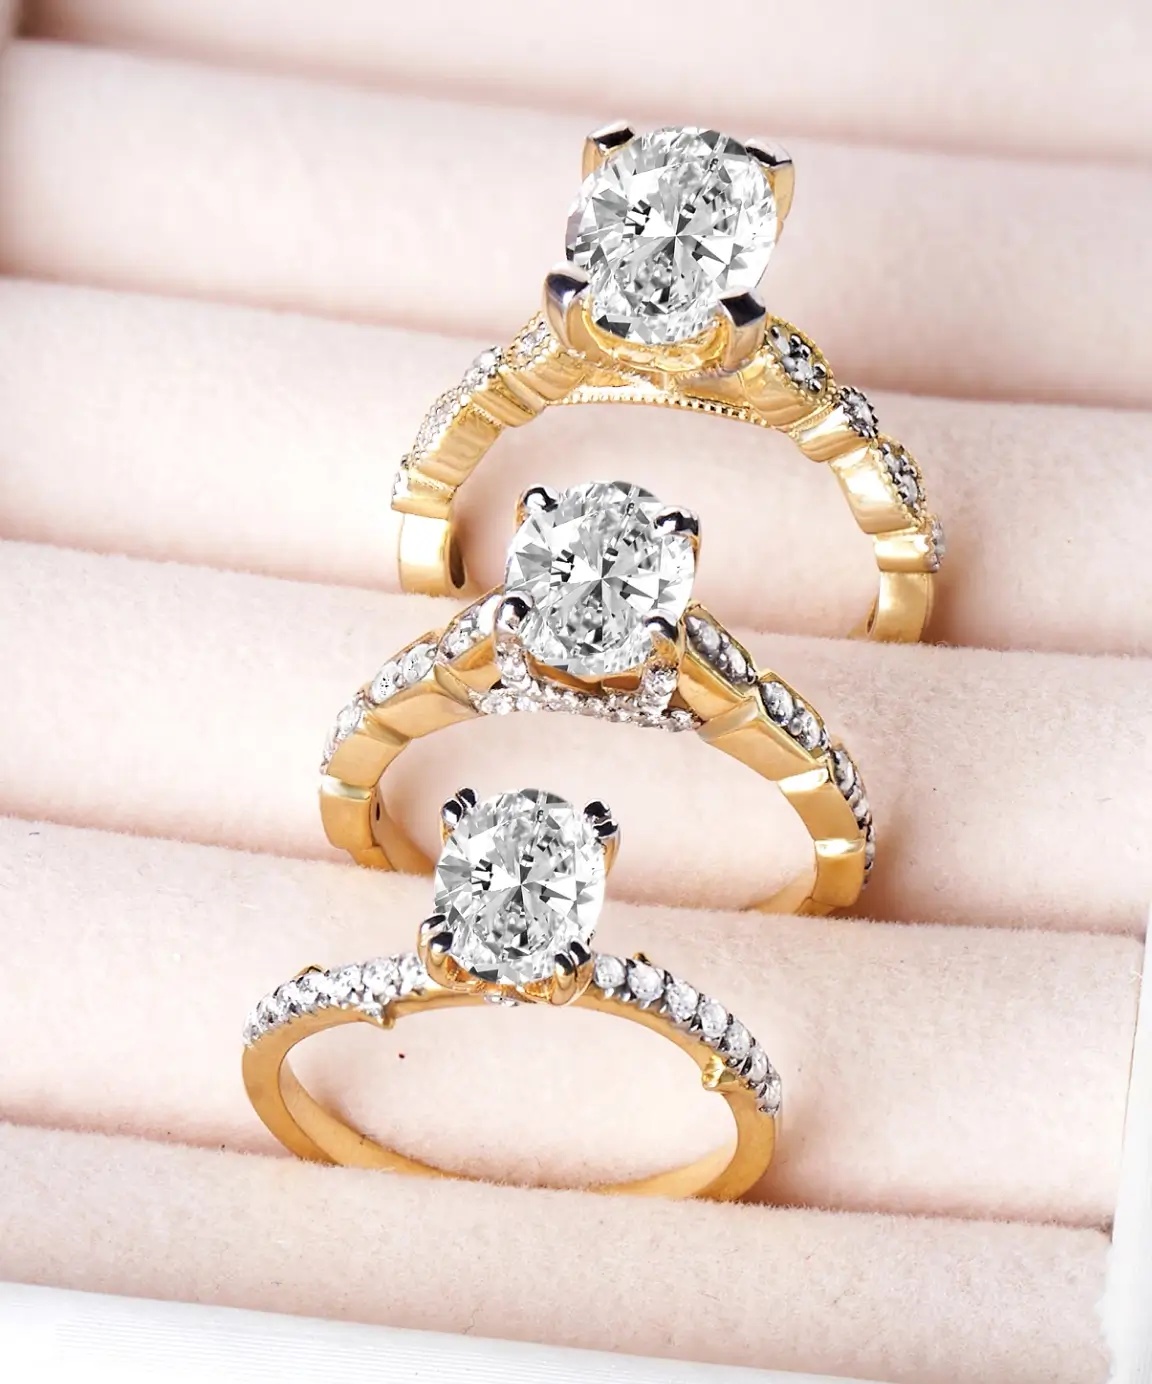 Can You Add A Halo To A Diamond Ring? | Casa D'Oro